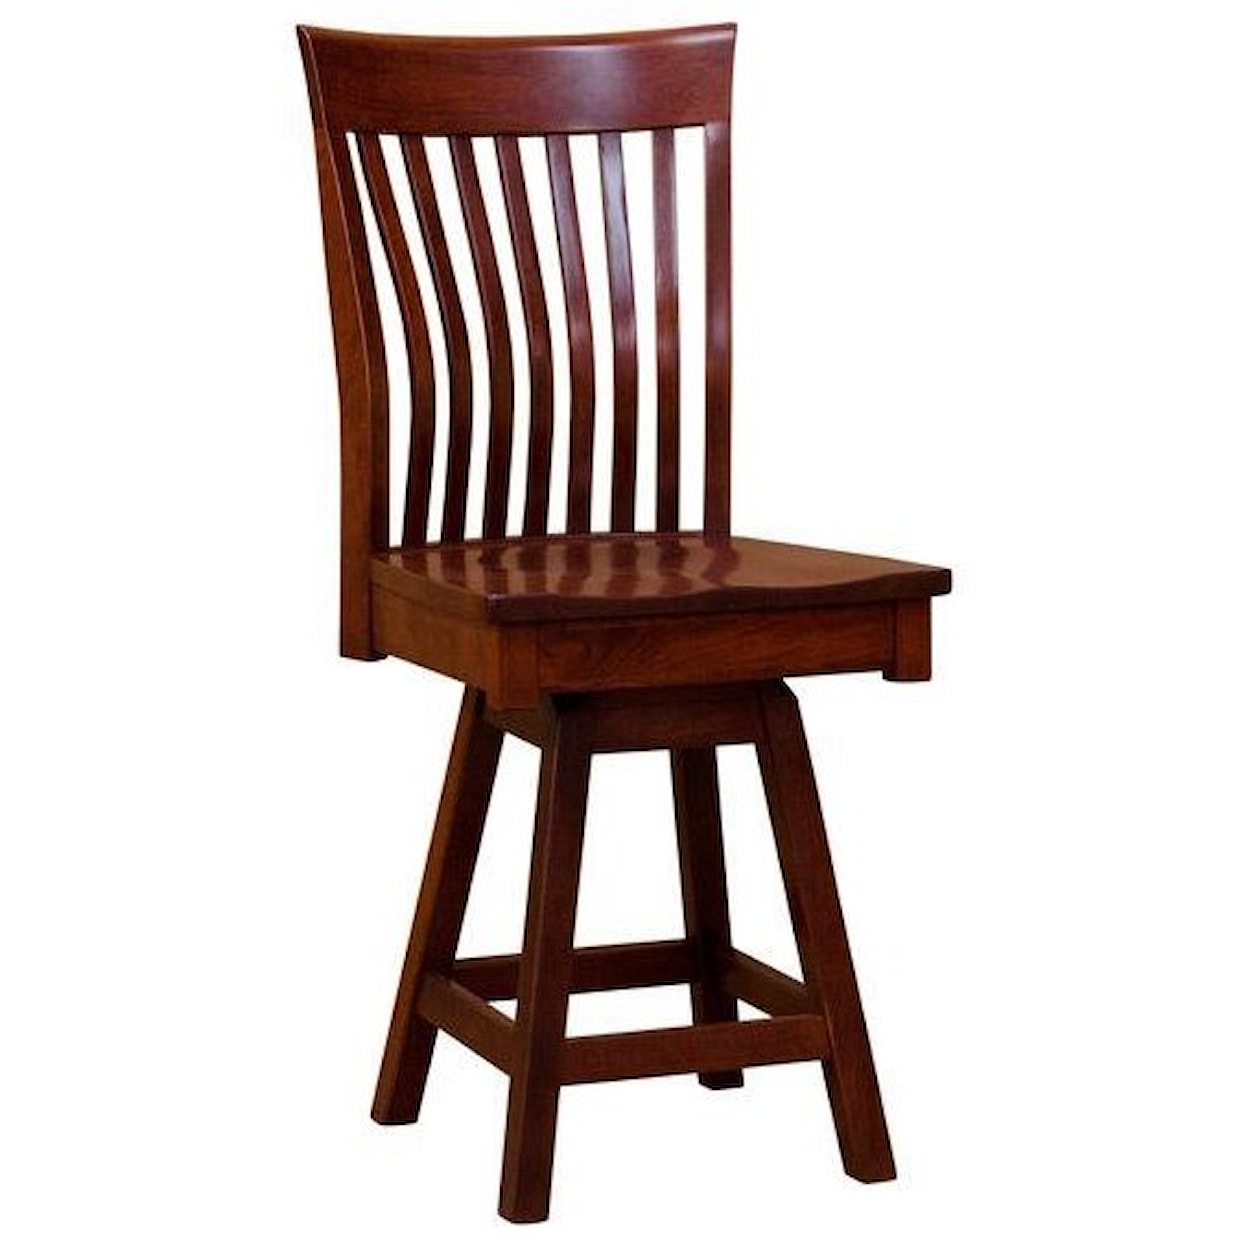 Country Comfort Woodworking Ashley 30" Swivel Stool